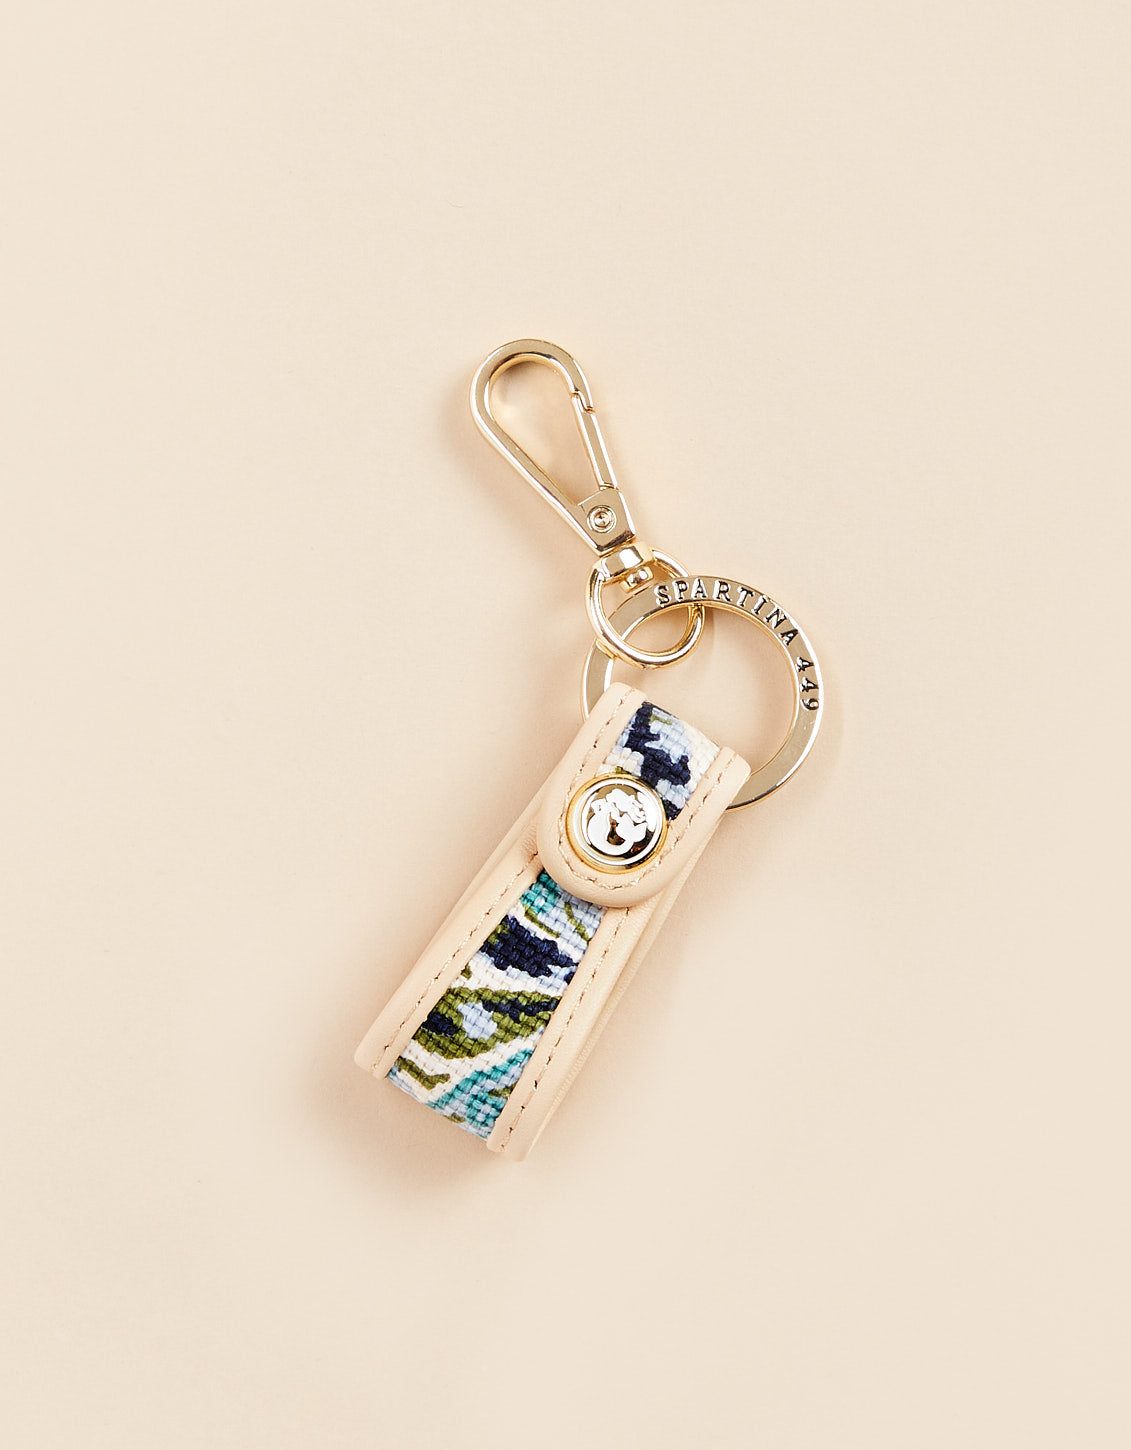 Women's Bag Charms & Keychains